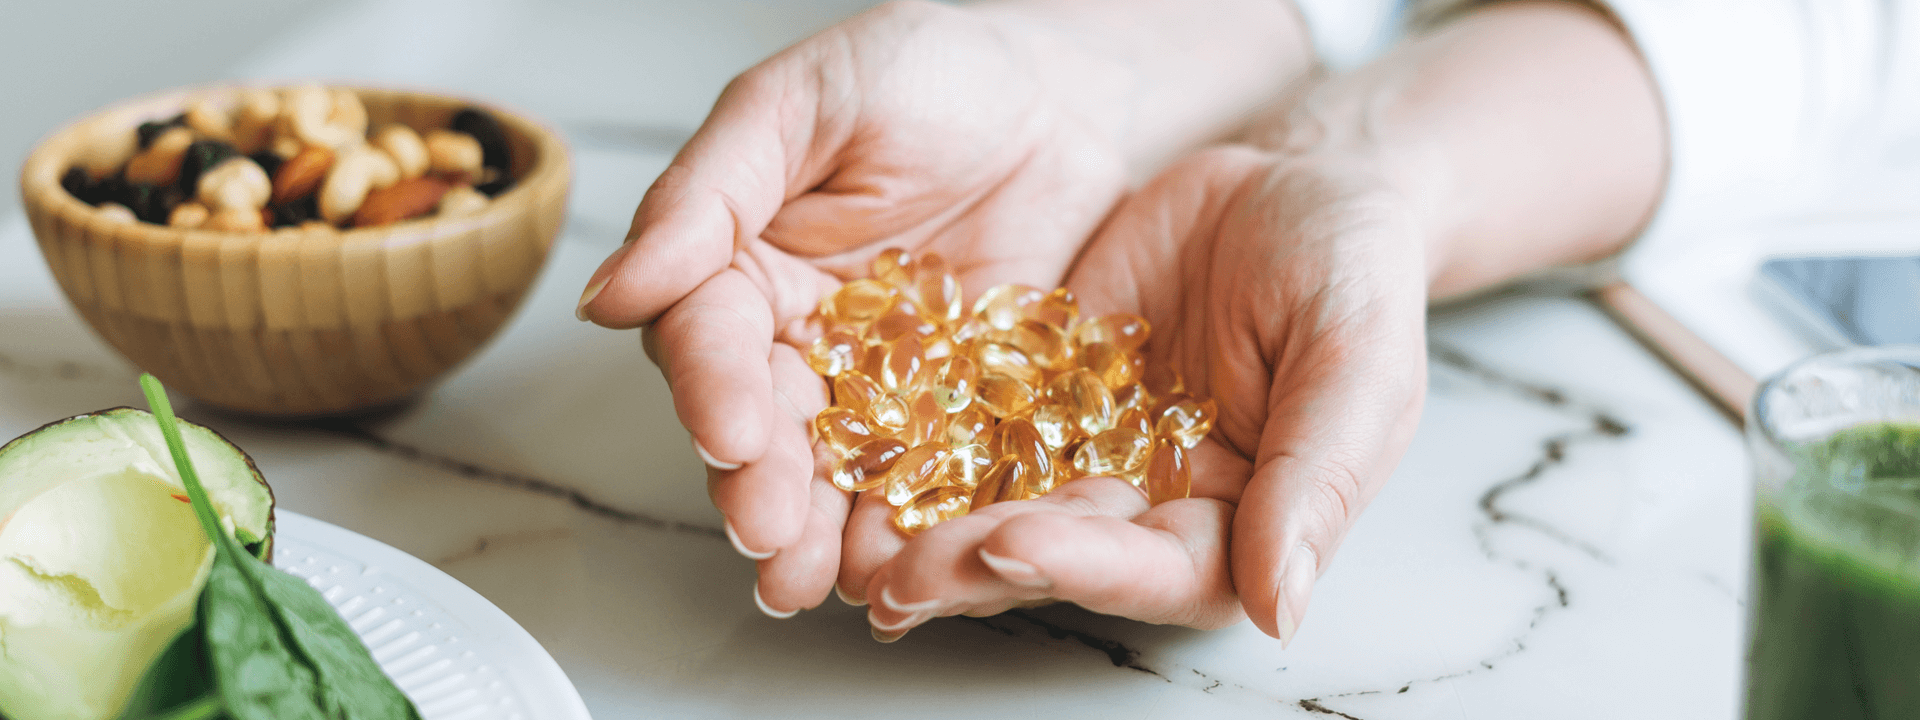 Arthritis: A Role for Omega-3 Fatty Acid Supplements